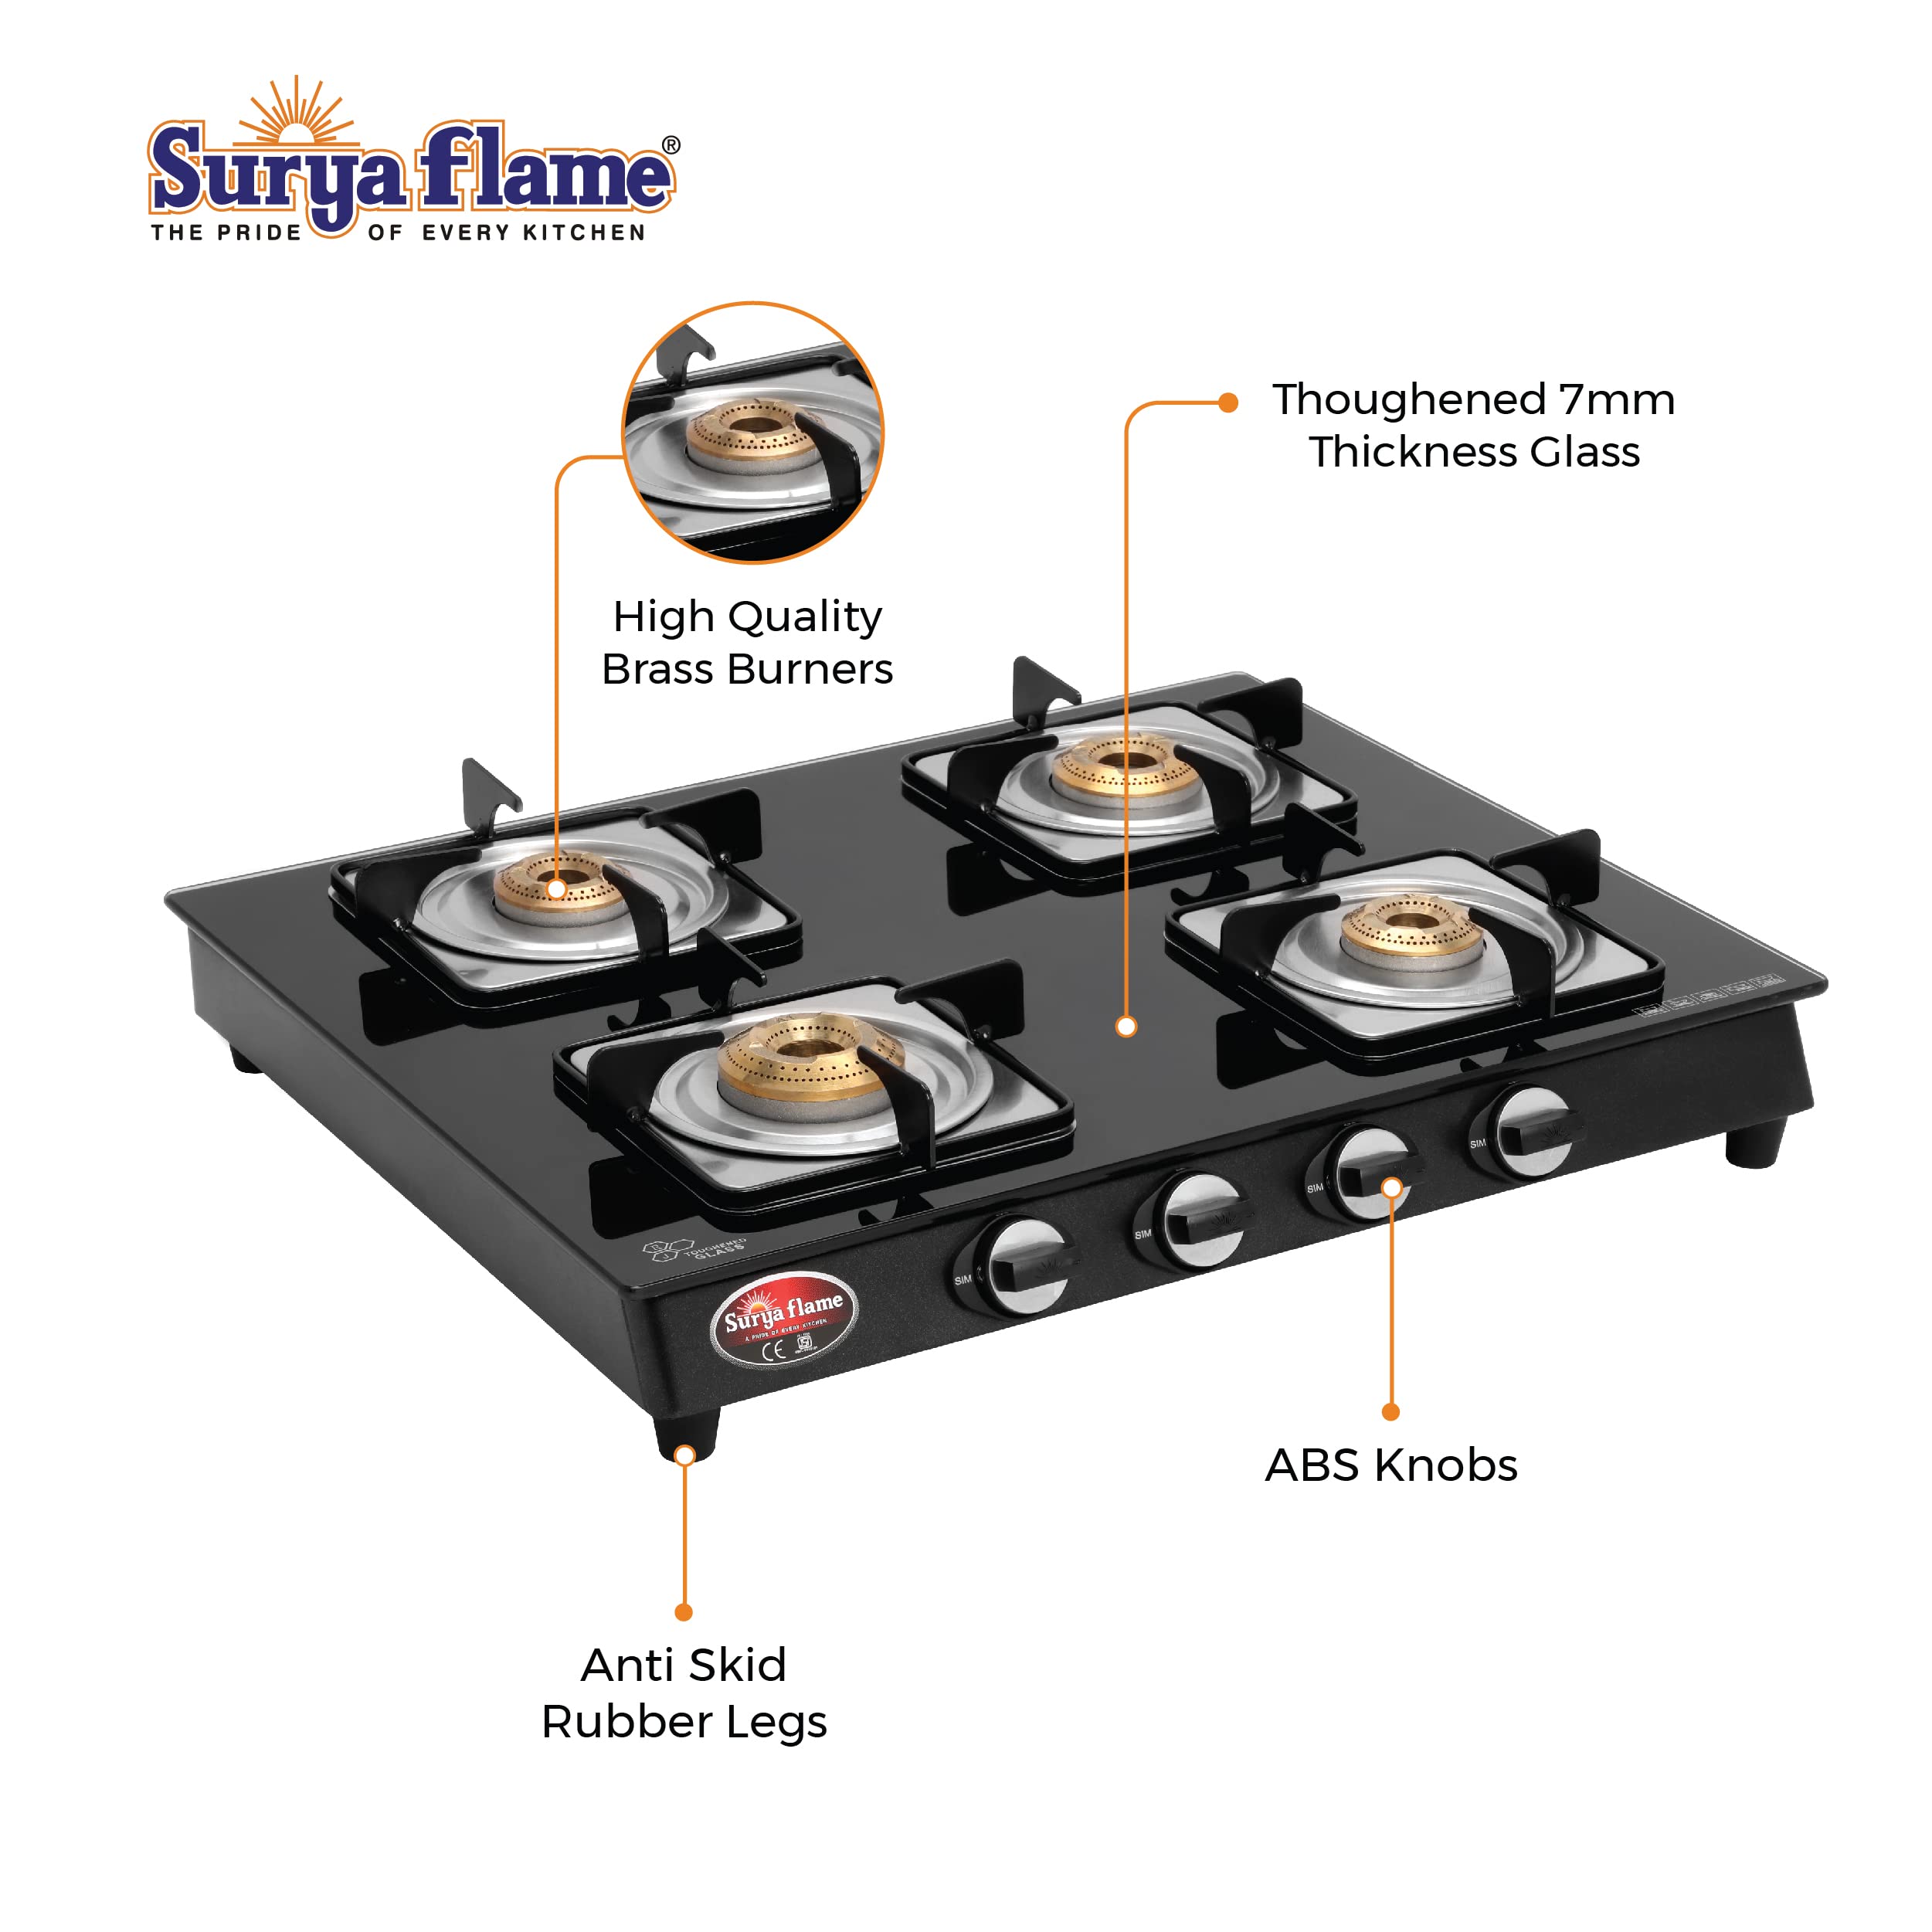 SuryaFlame Nexa LPG Gas Stove | Gas Stove 4 Burners | Glass Top With Stainless Steel Body | 2 Years Complete Door Step Warranty Including Glass - Black(Pack of 2)